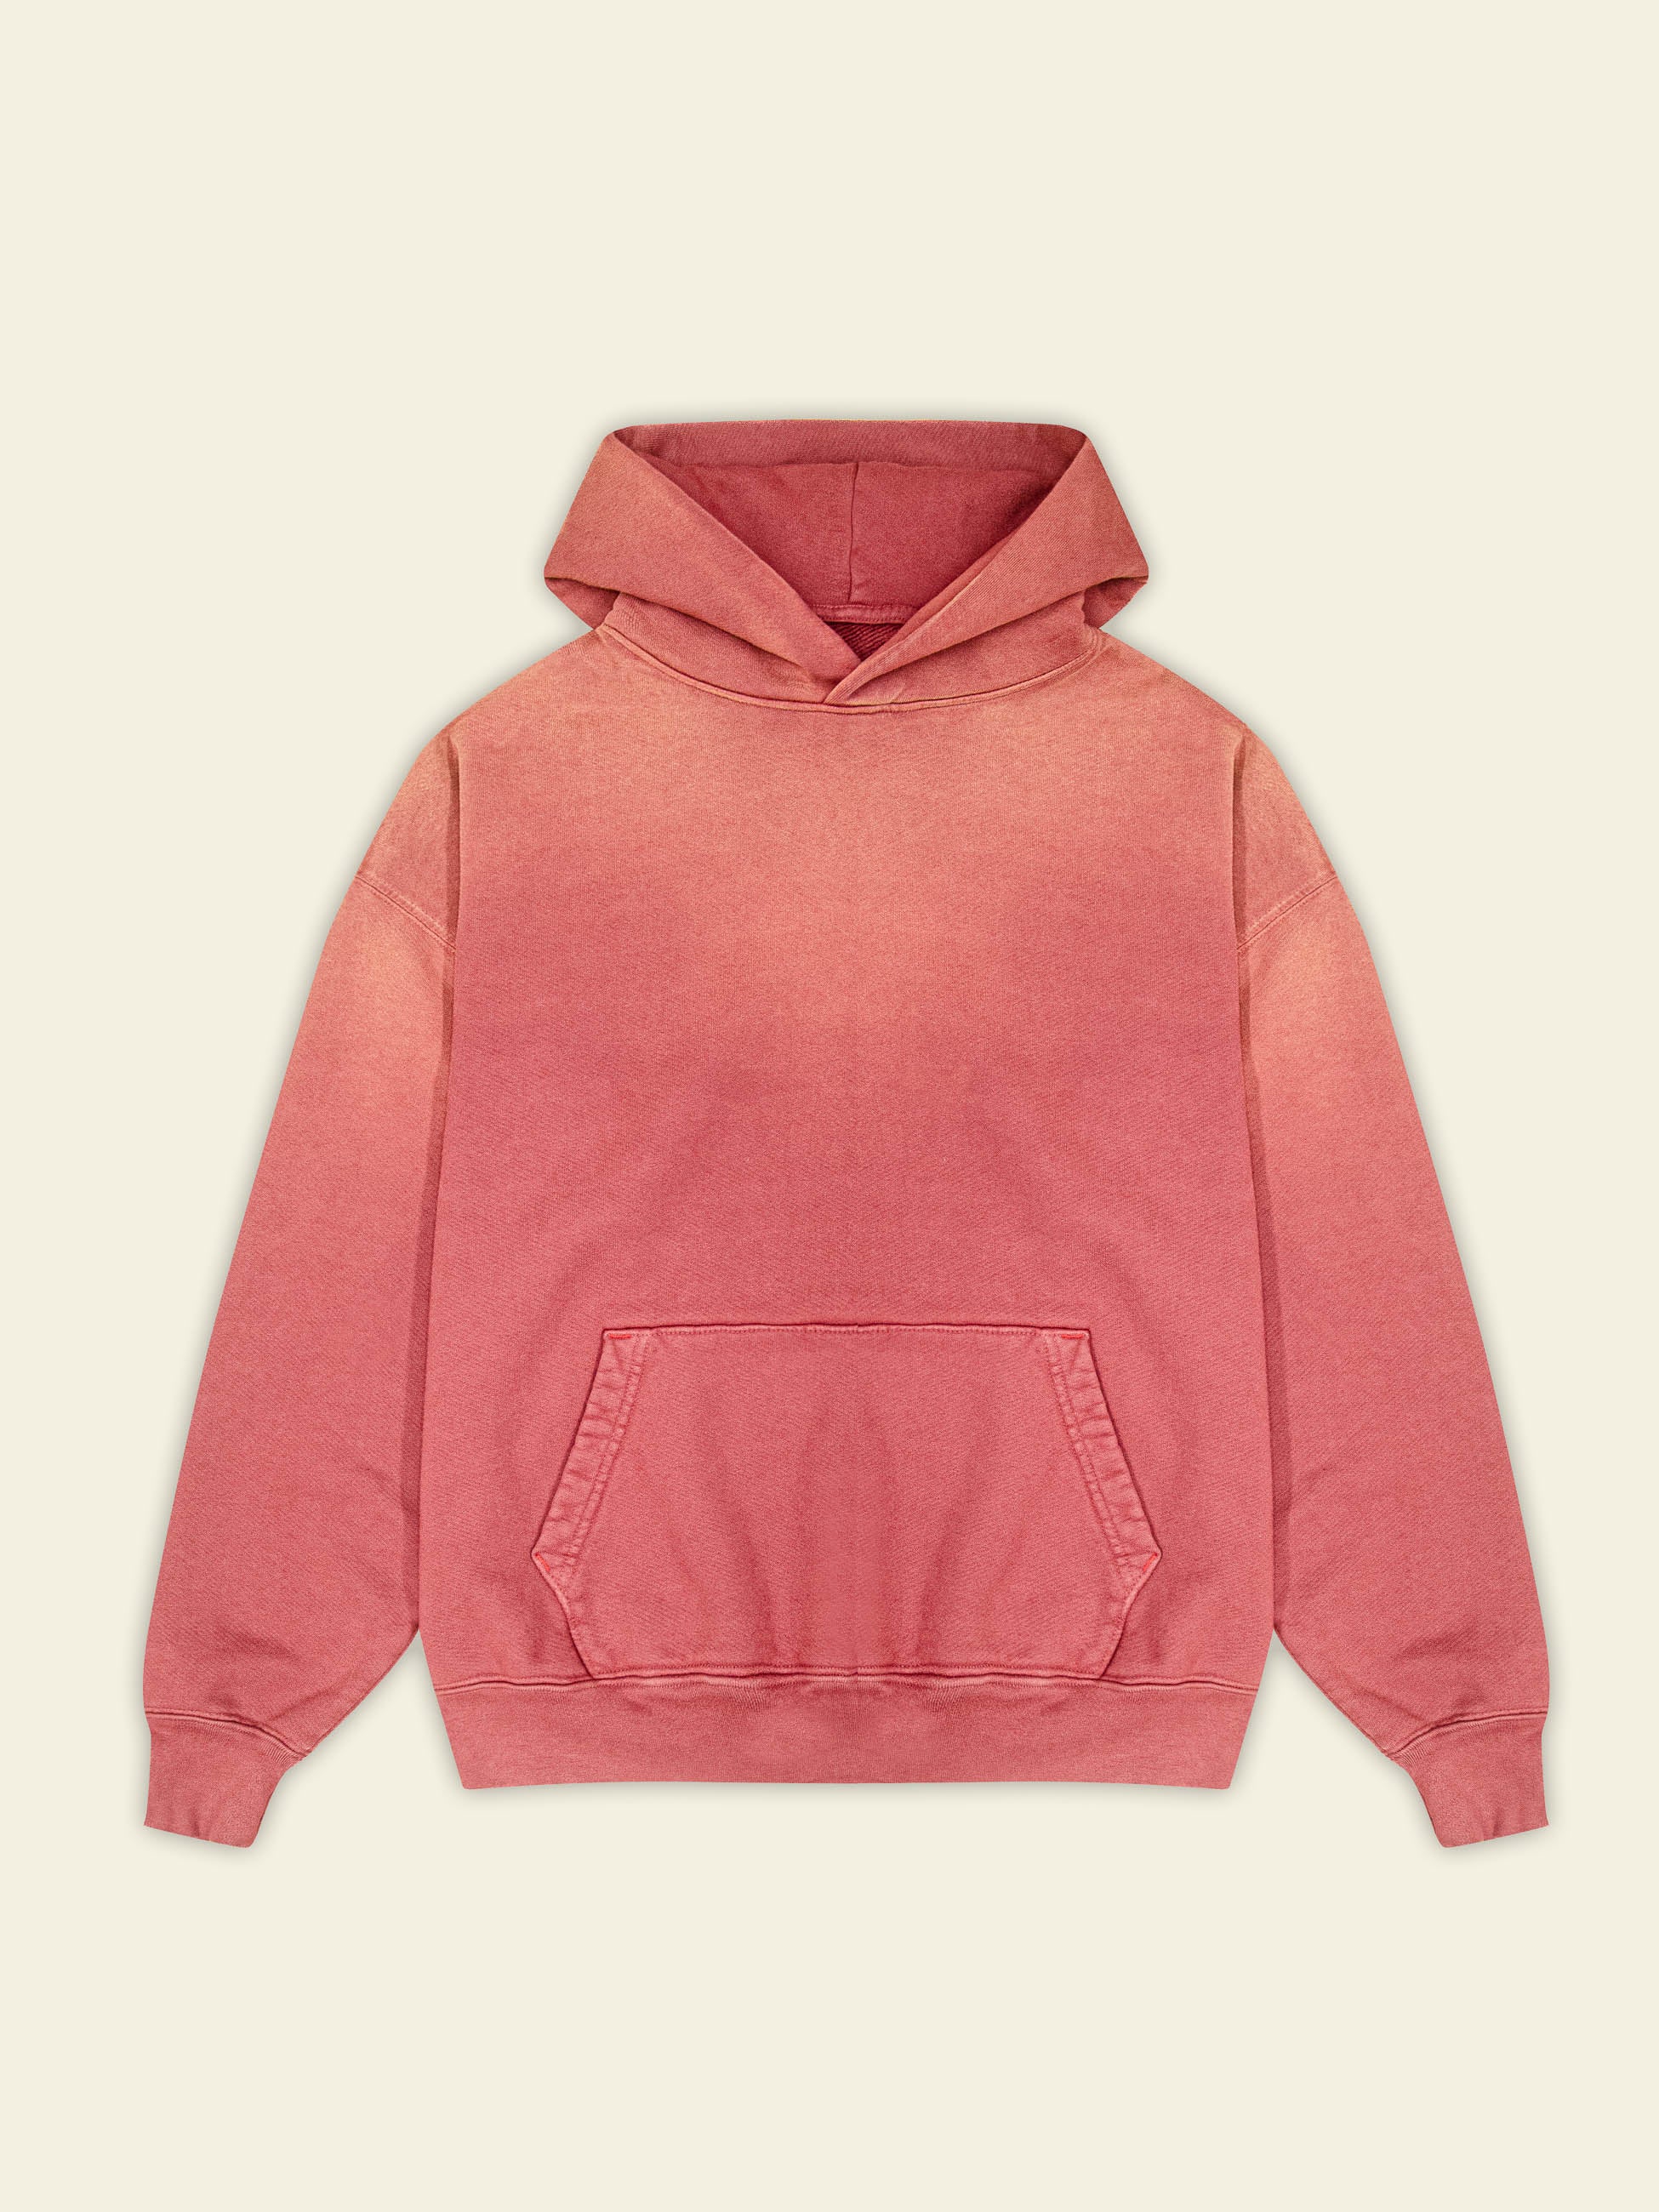 Publik Brand Double Layered Hoodie Tea Rose Red Heavyweight Fleece, all made in USA Flat Lay